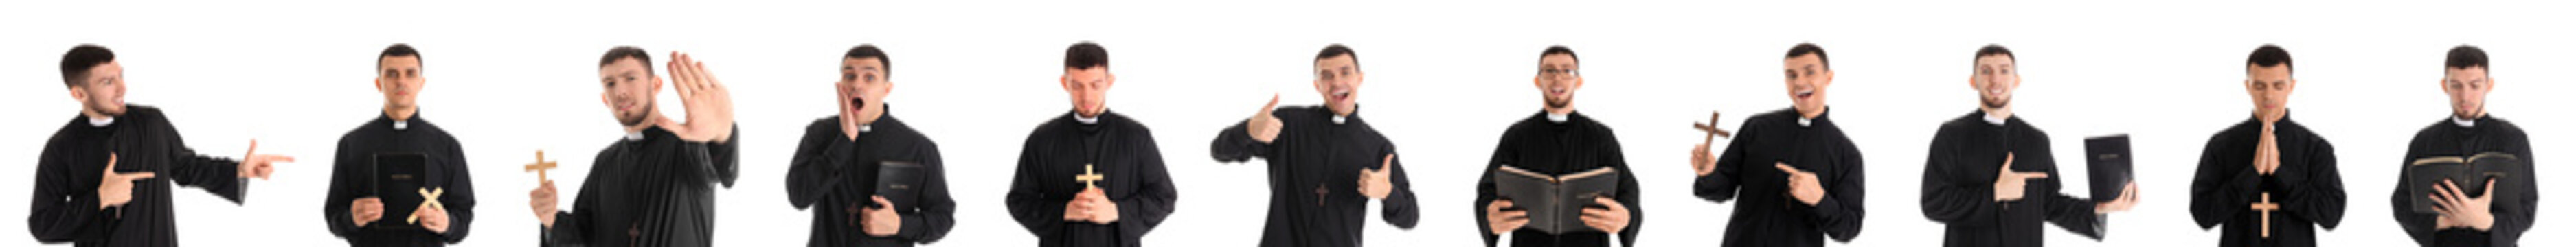 Set of young priests on white background